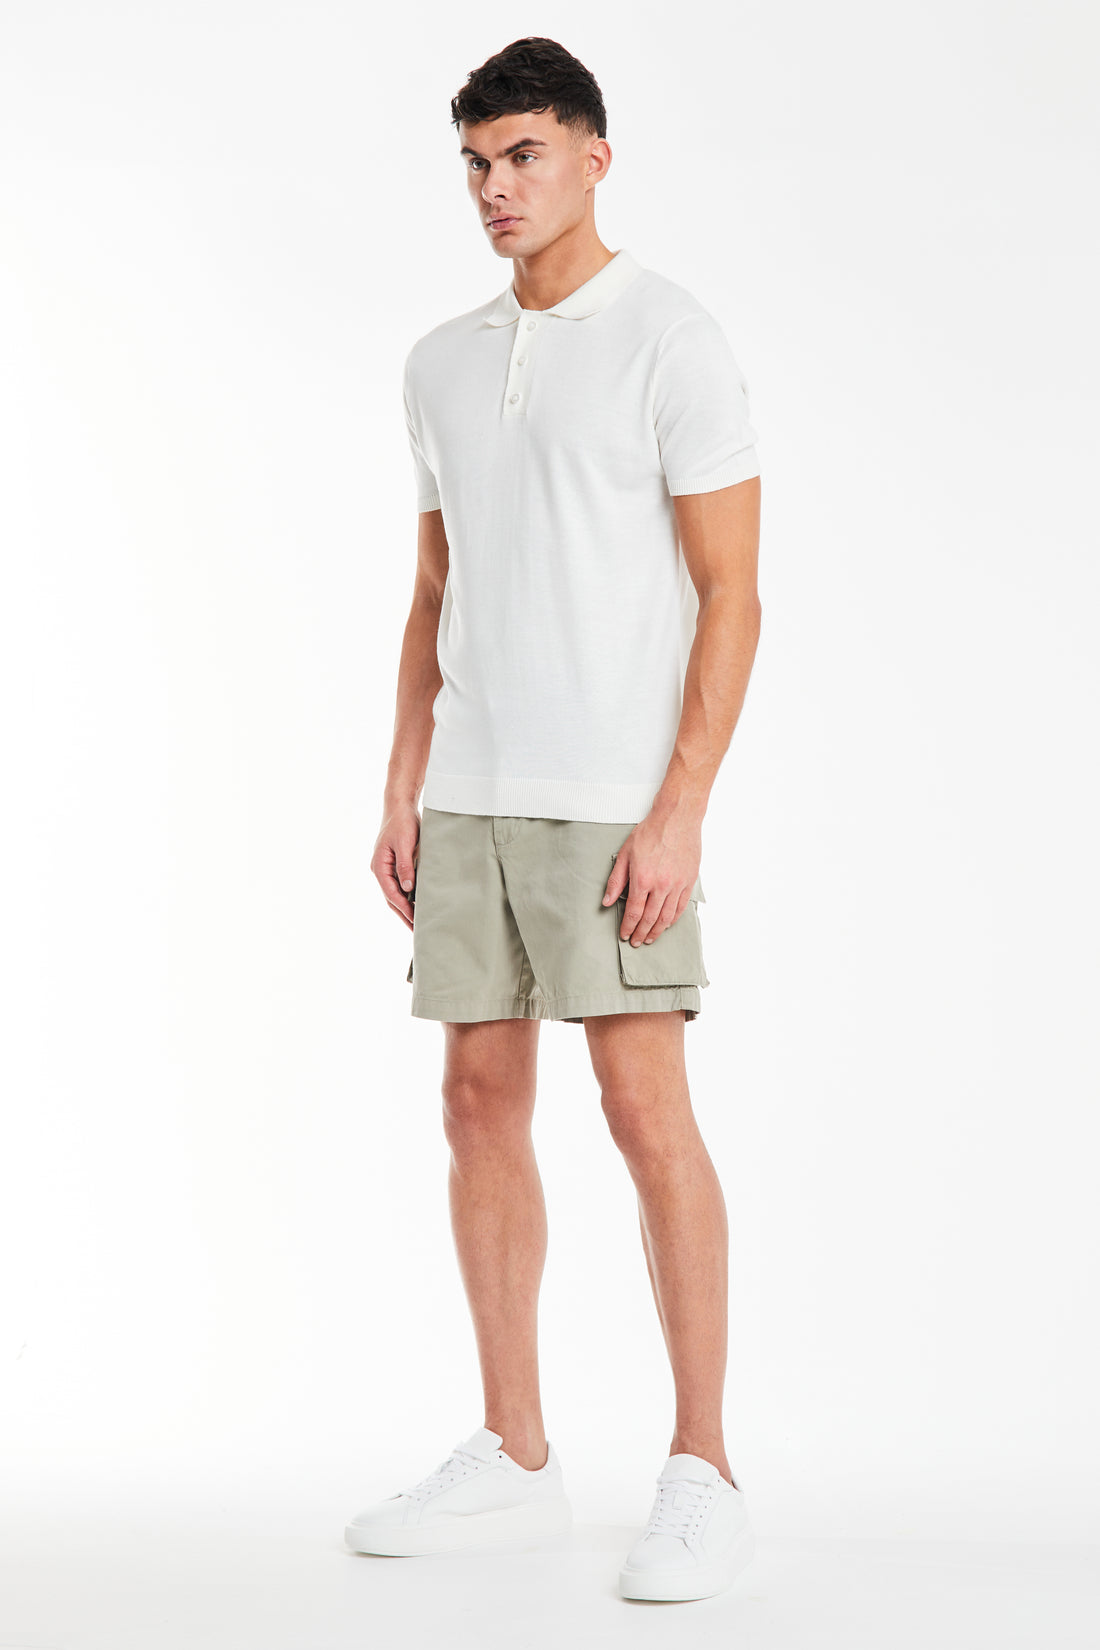 model wearing men's utility shorts with white polo